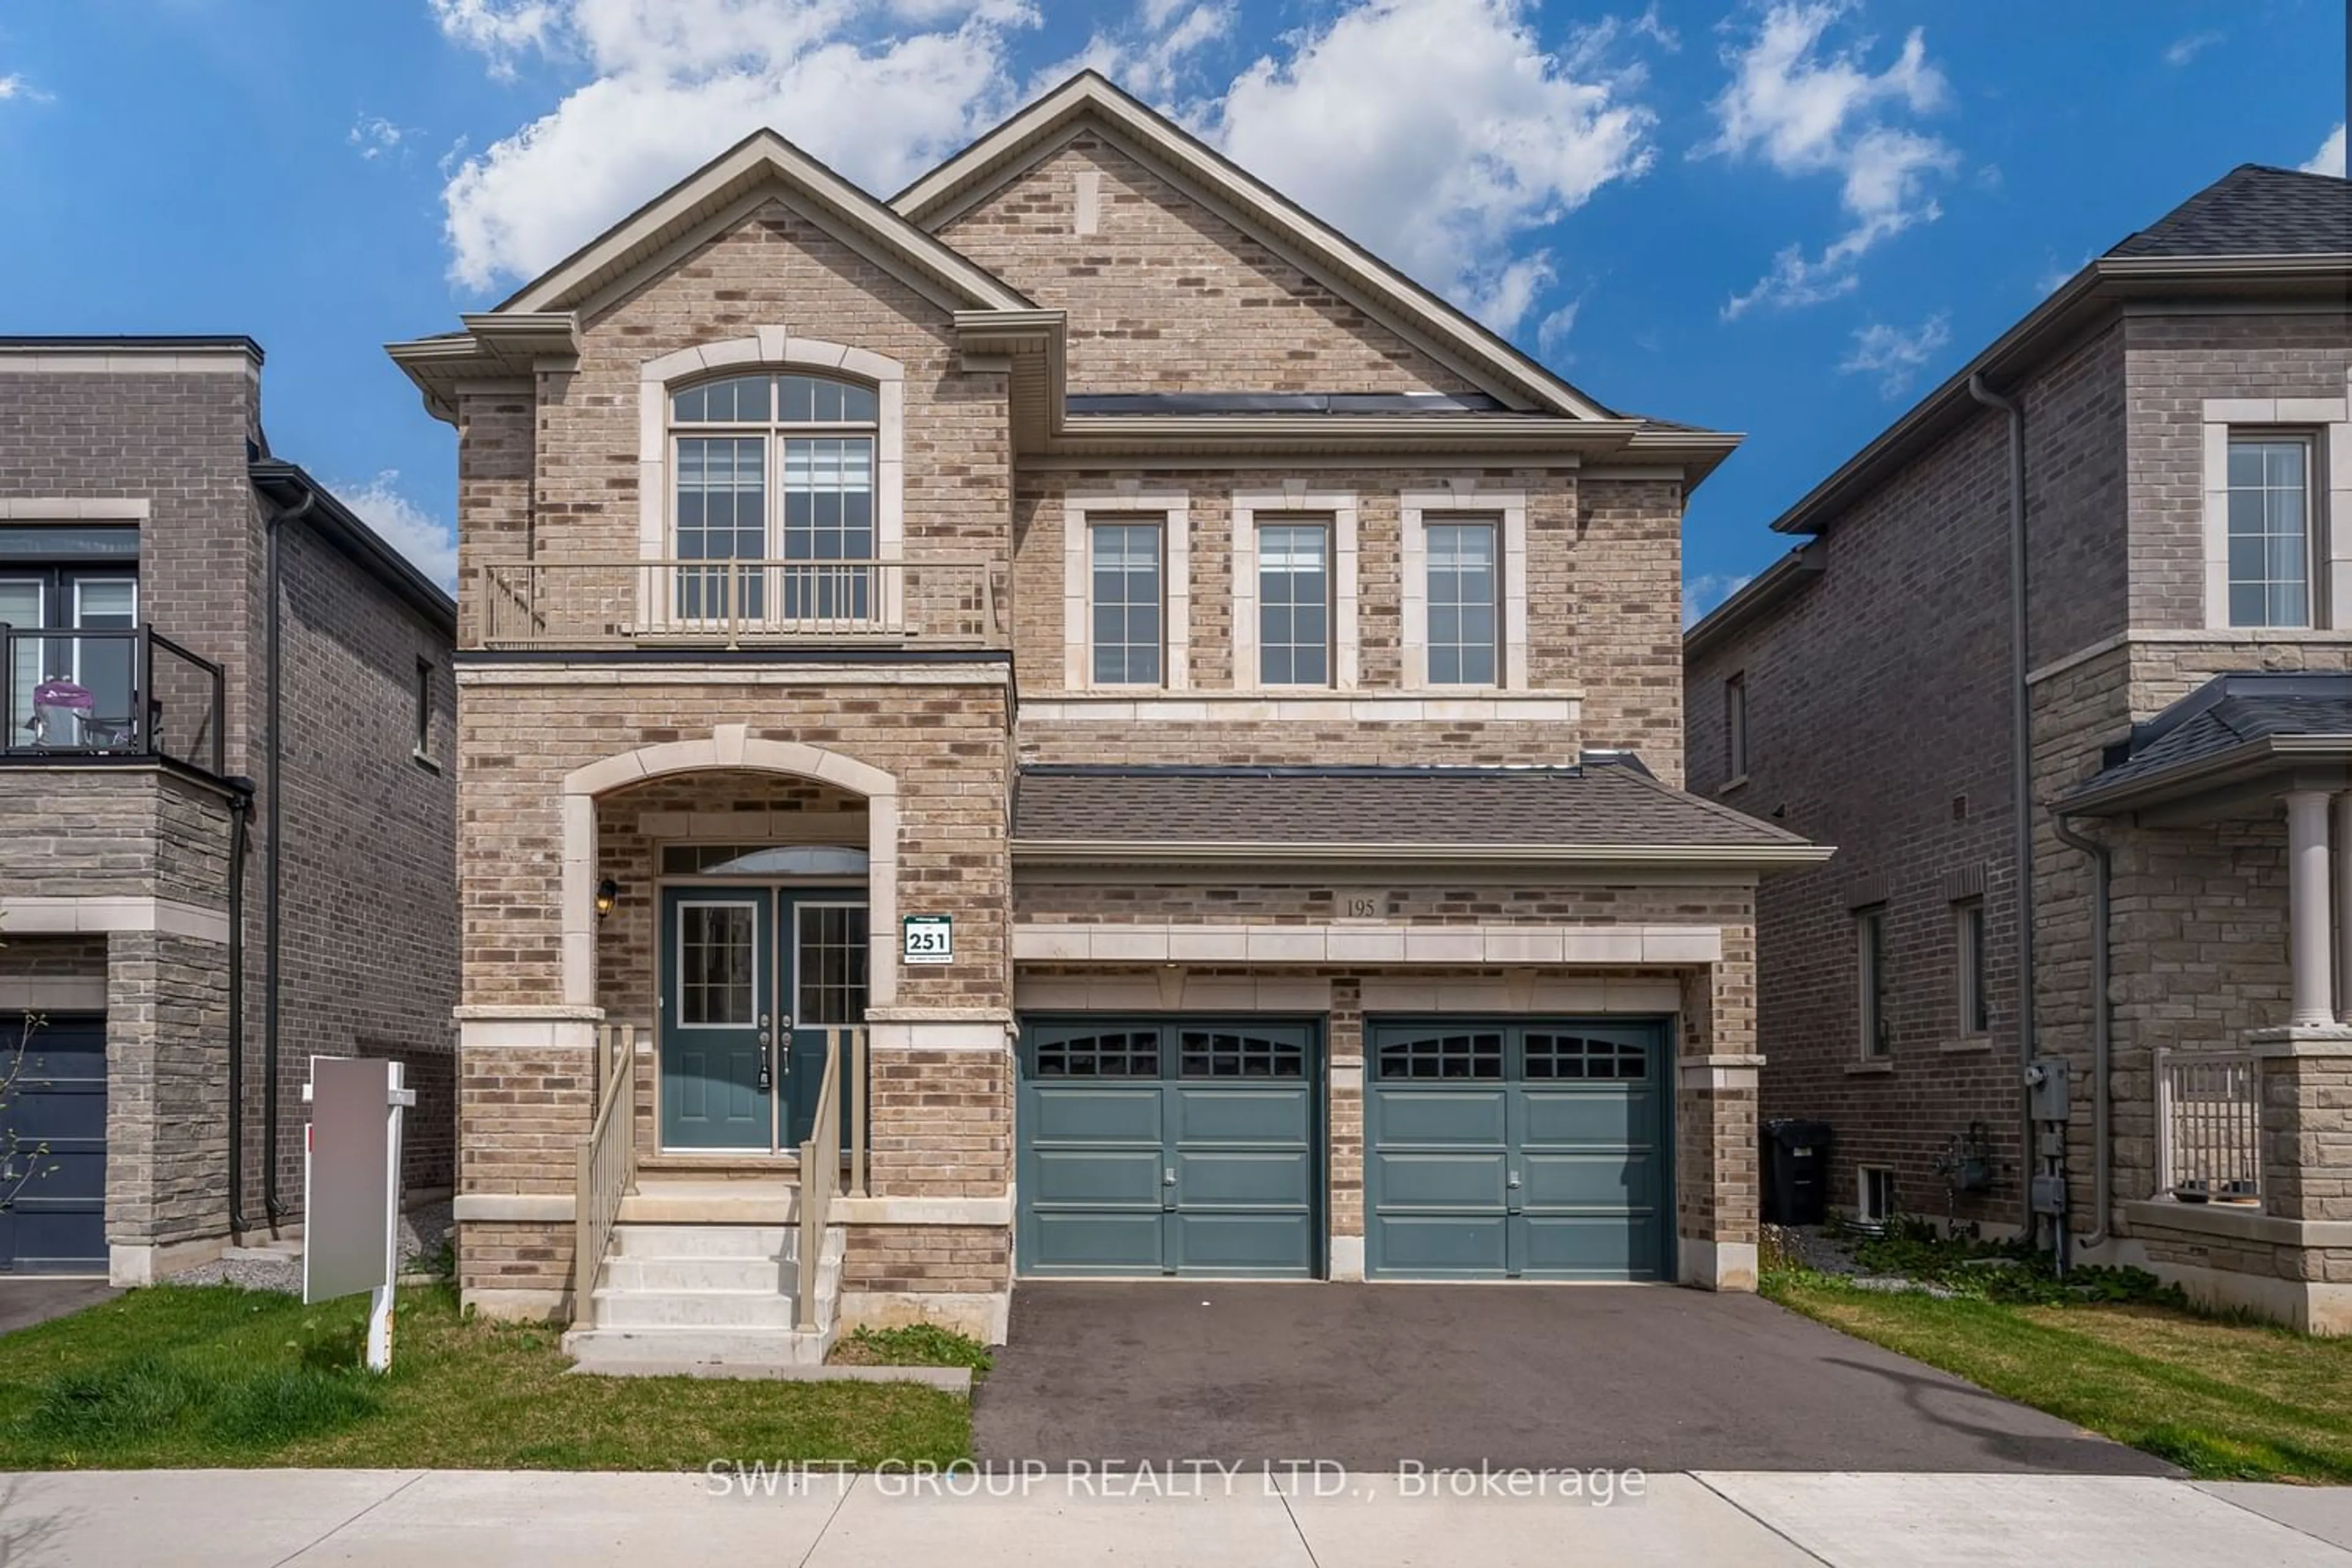 Home with brick exterior material for 195 Great Falls Blvd, Hamilton Ontario L8B 1Y9